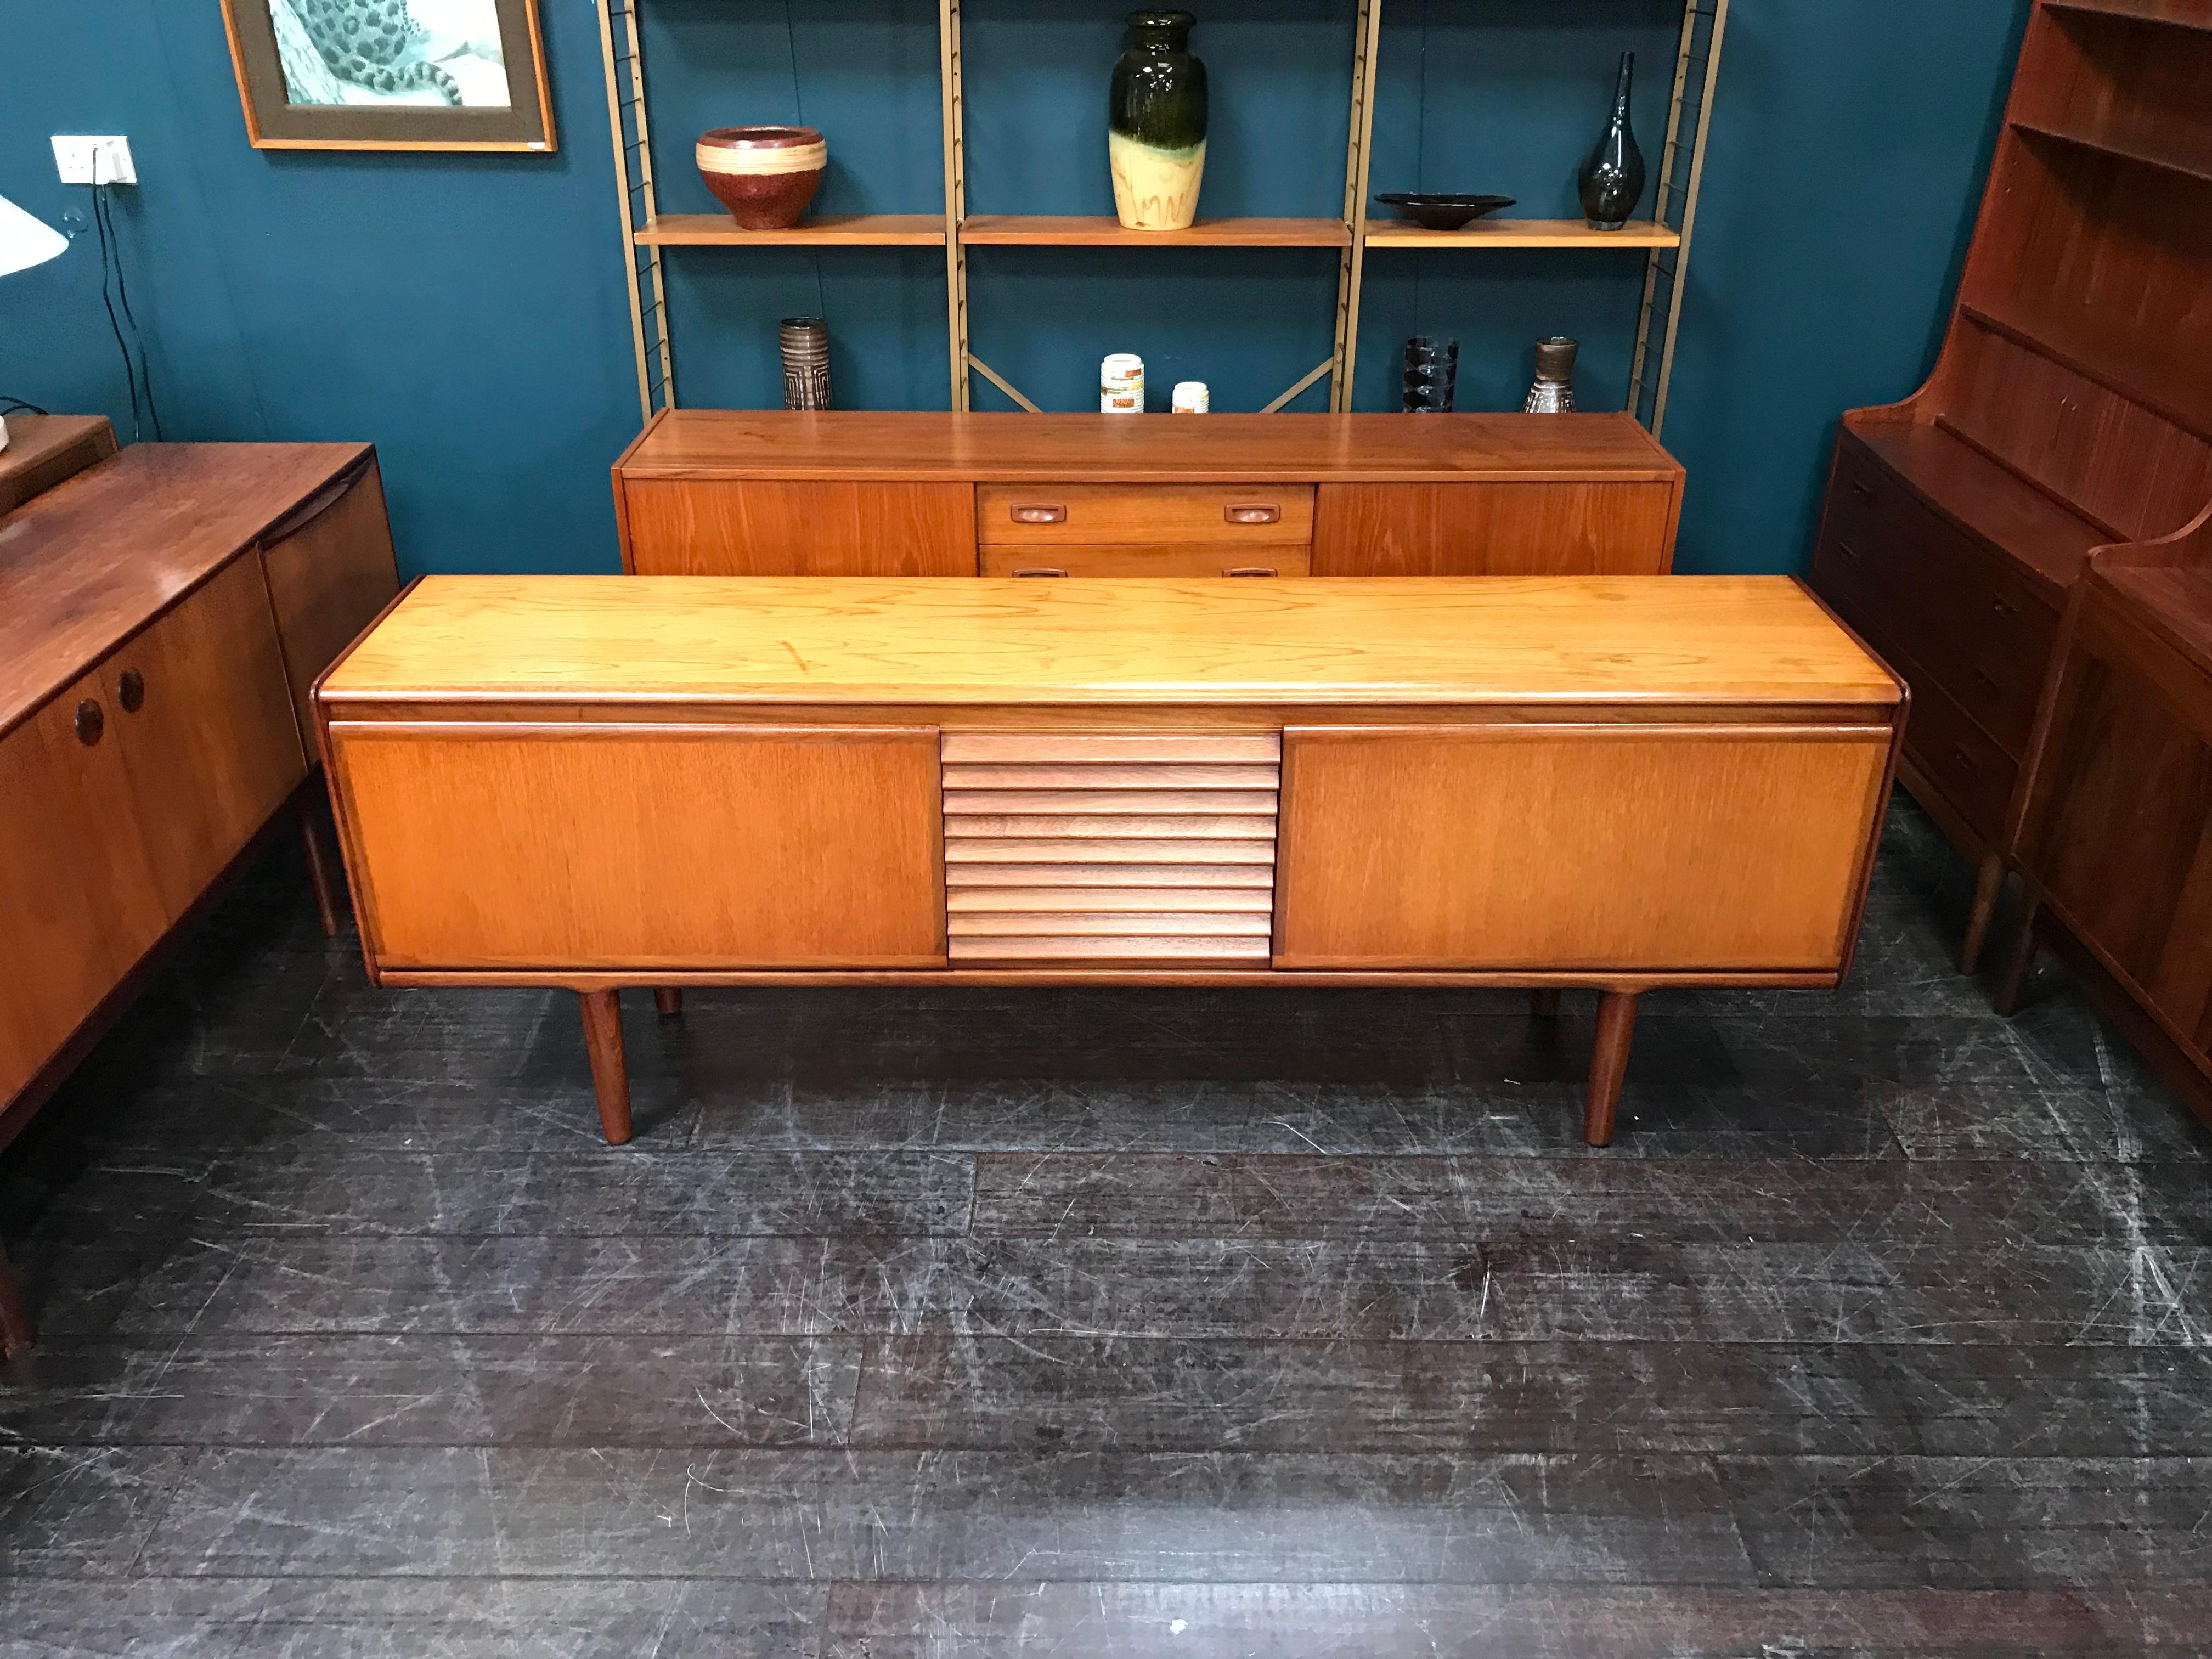 This is a super cool, Scandinavian influenced, Minimalist retro sideboard by famed midcentury maker White and Newton. It has three very stylishly finished drawers, the top drawer with cutlery divider, set between two capacious shelved cabinets with